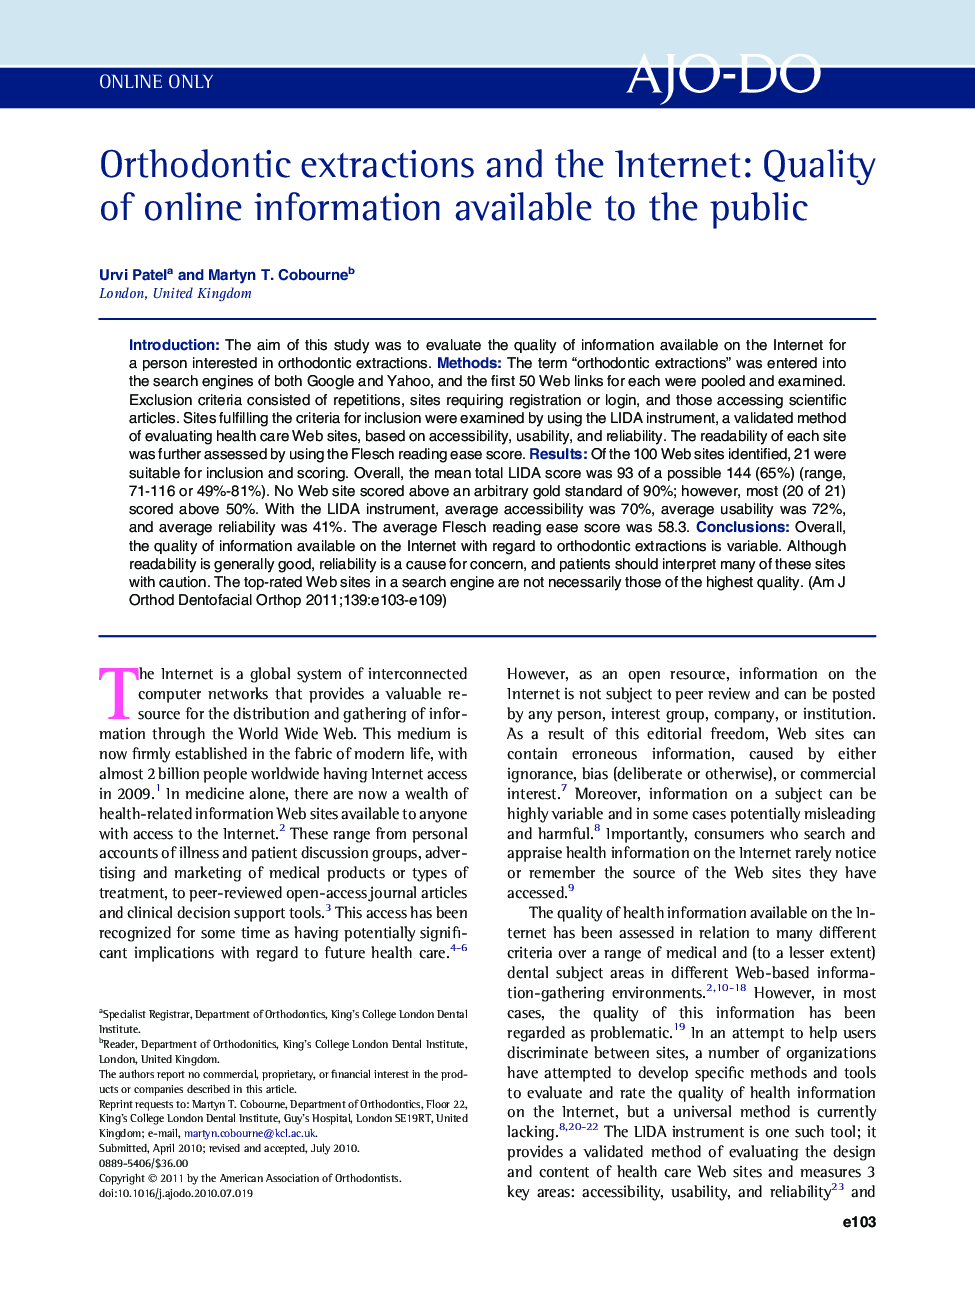 Orthodontic extractions and the Internet: Quality of online information available to the public 